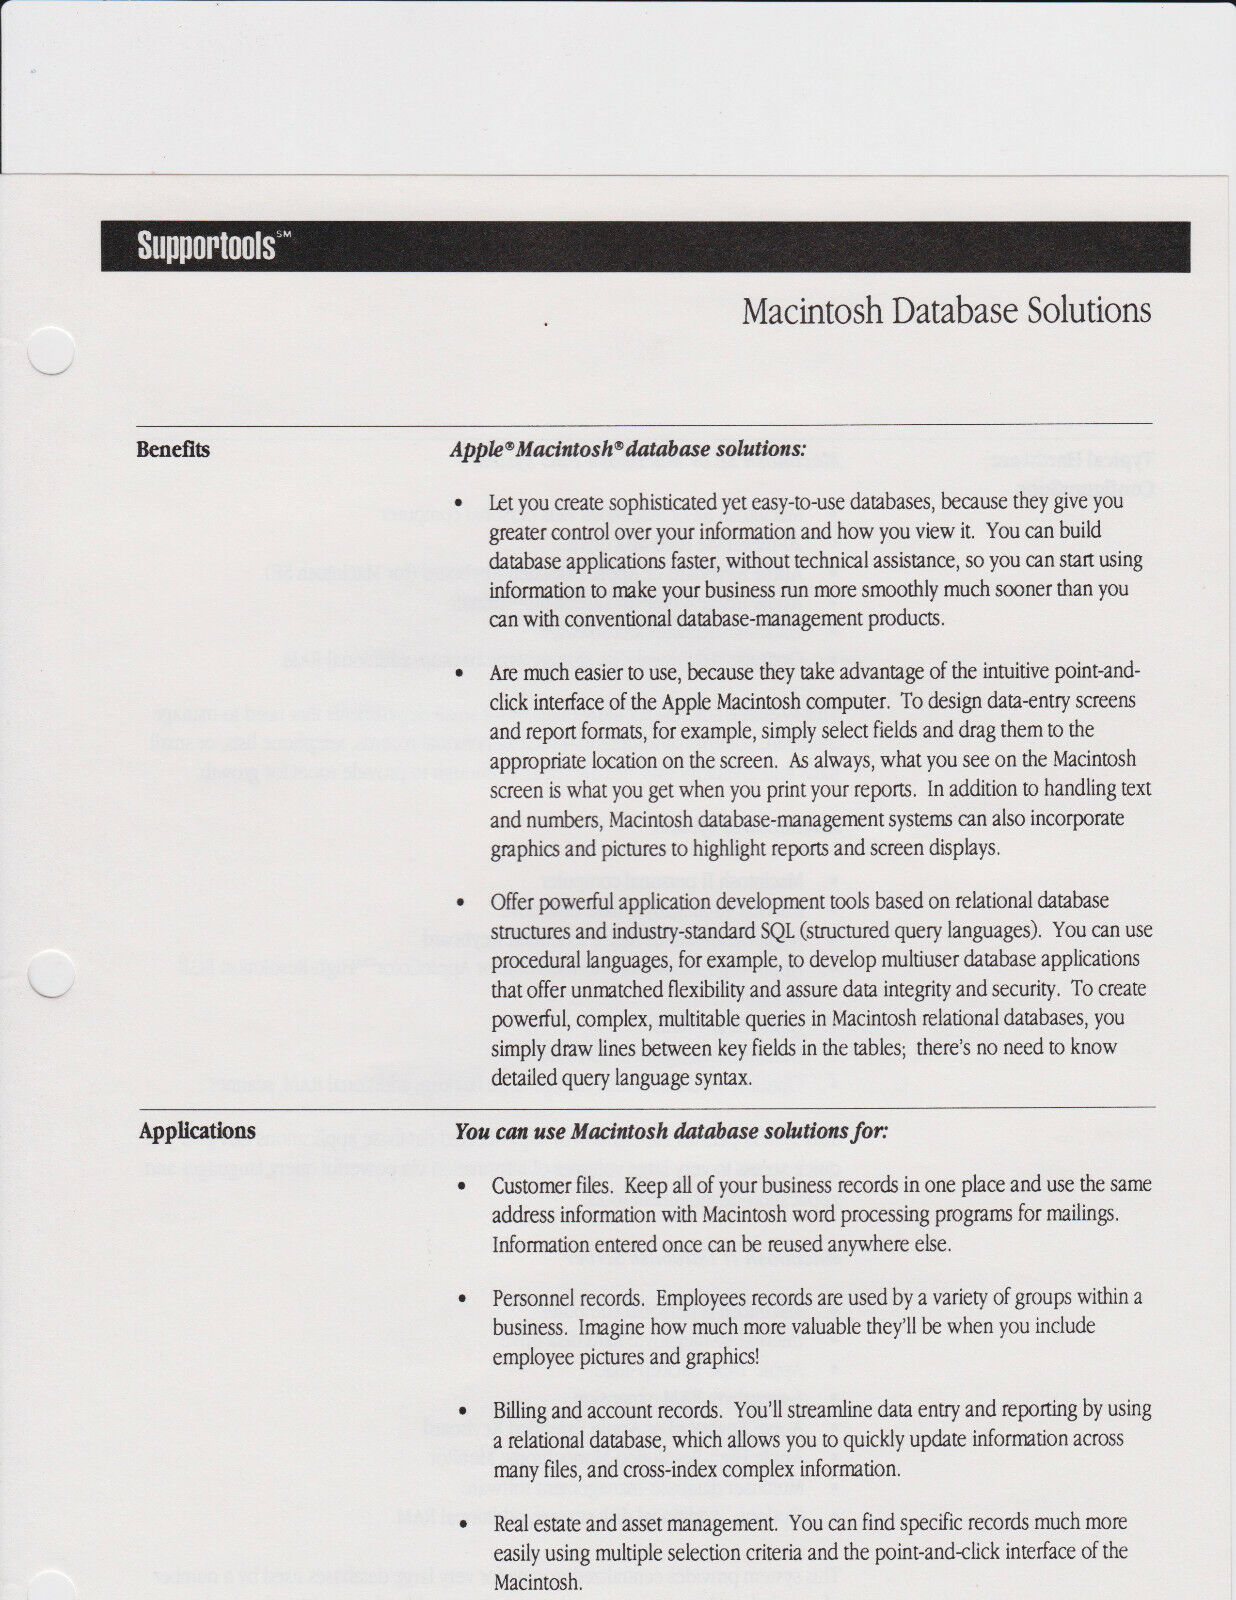 Macintosh Spreadsheet Solutions (6pages) Final Price